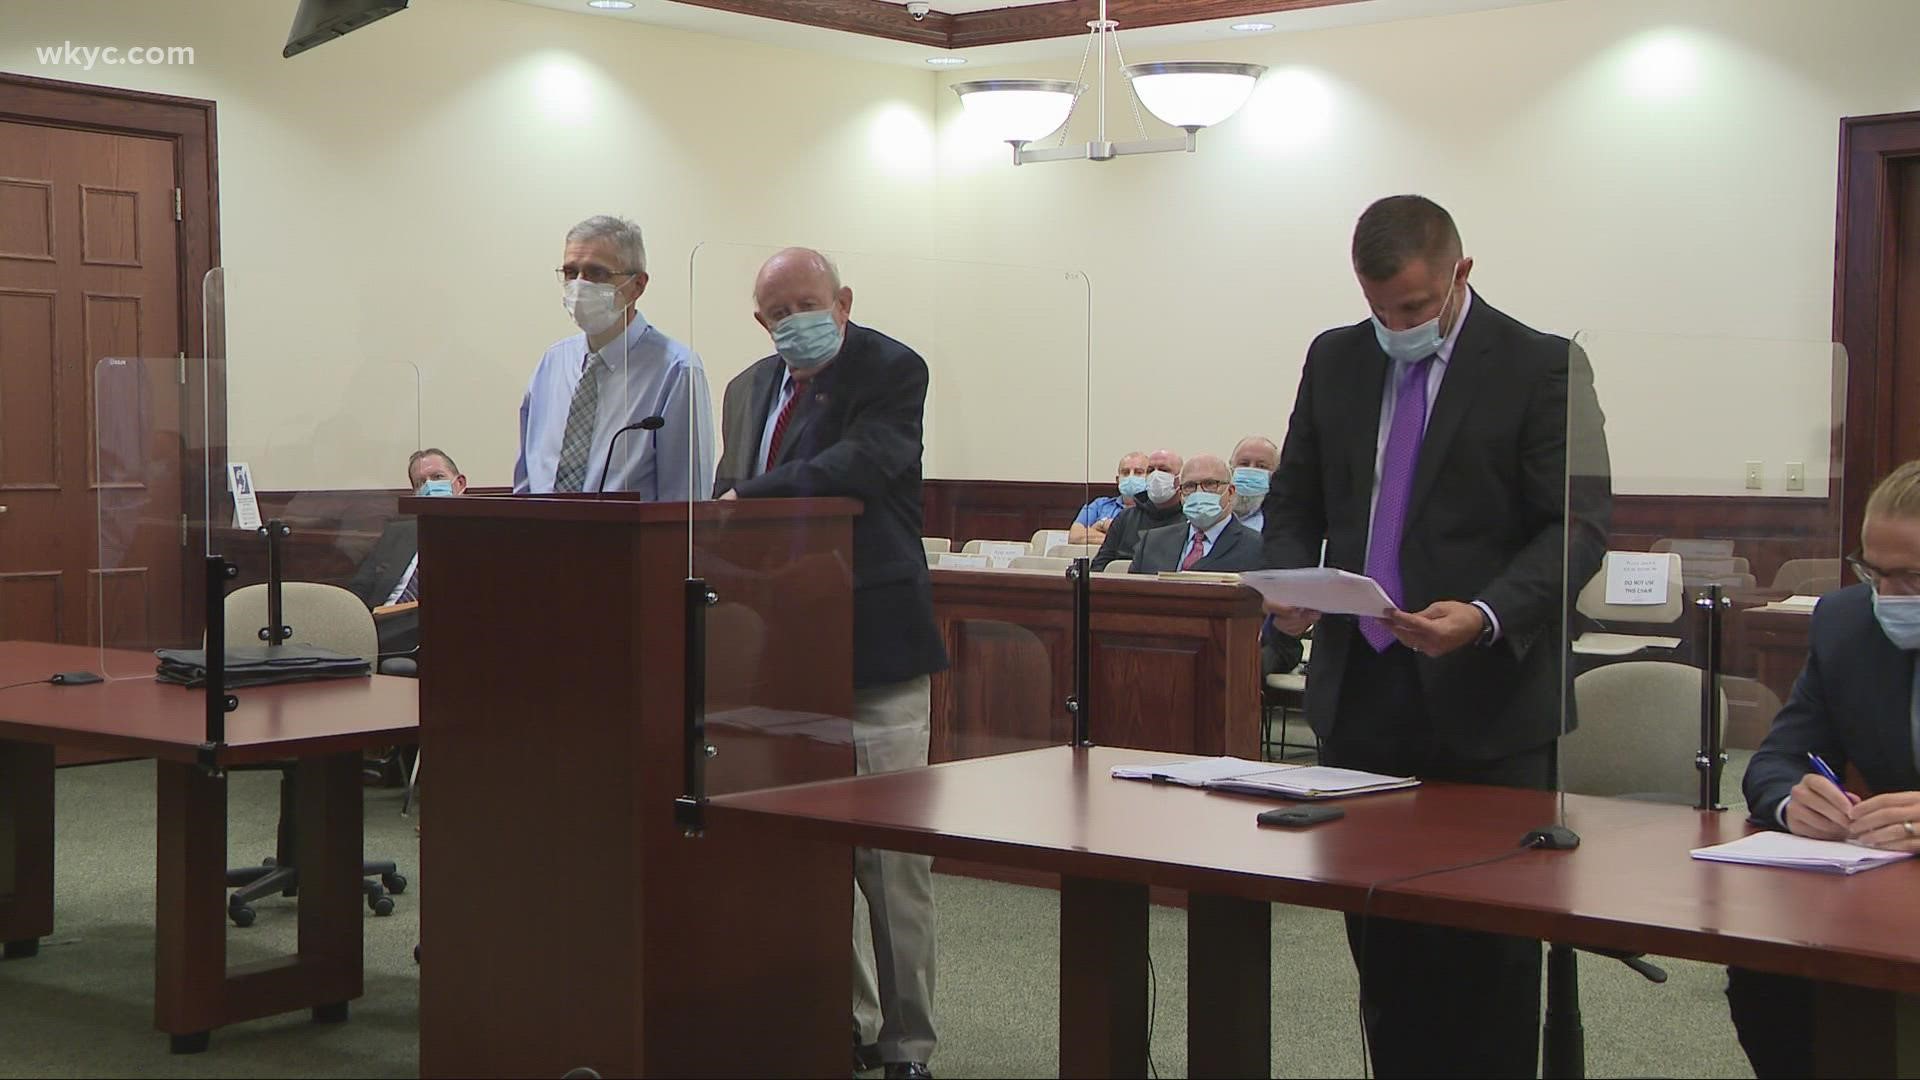 WATCH LIVE: Elyria Councilman arraigned on solicitation charges | wkyc.com